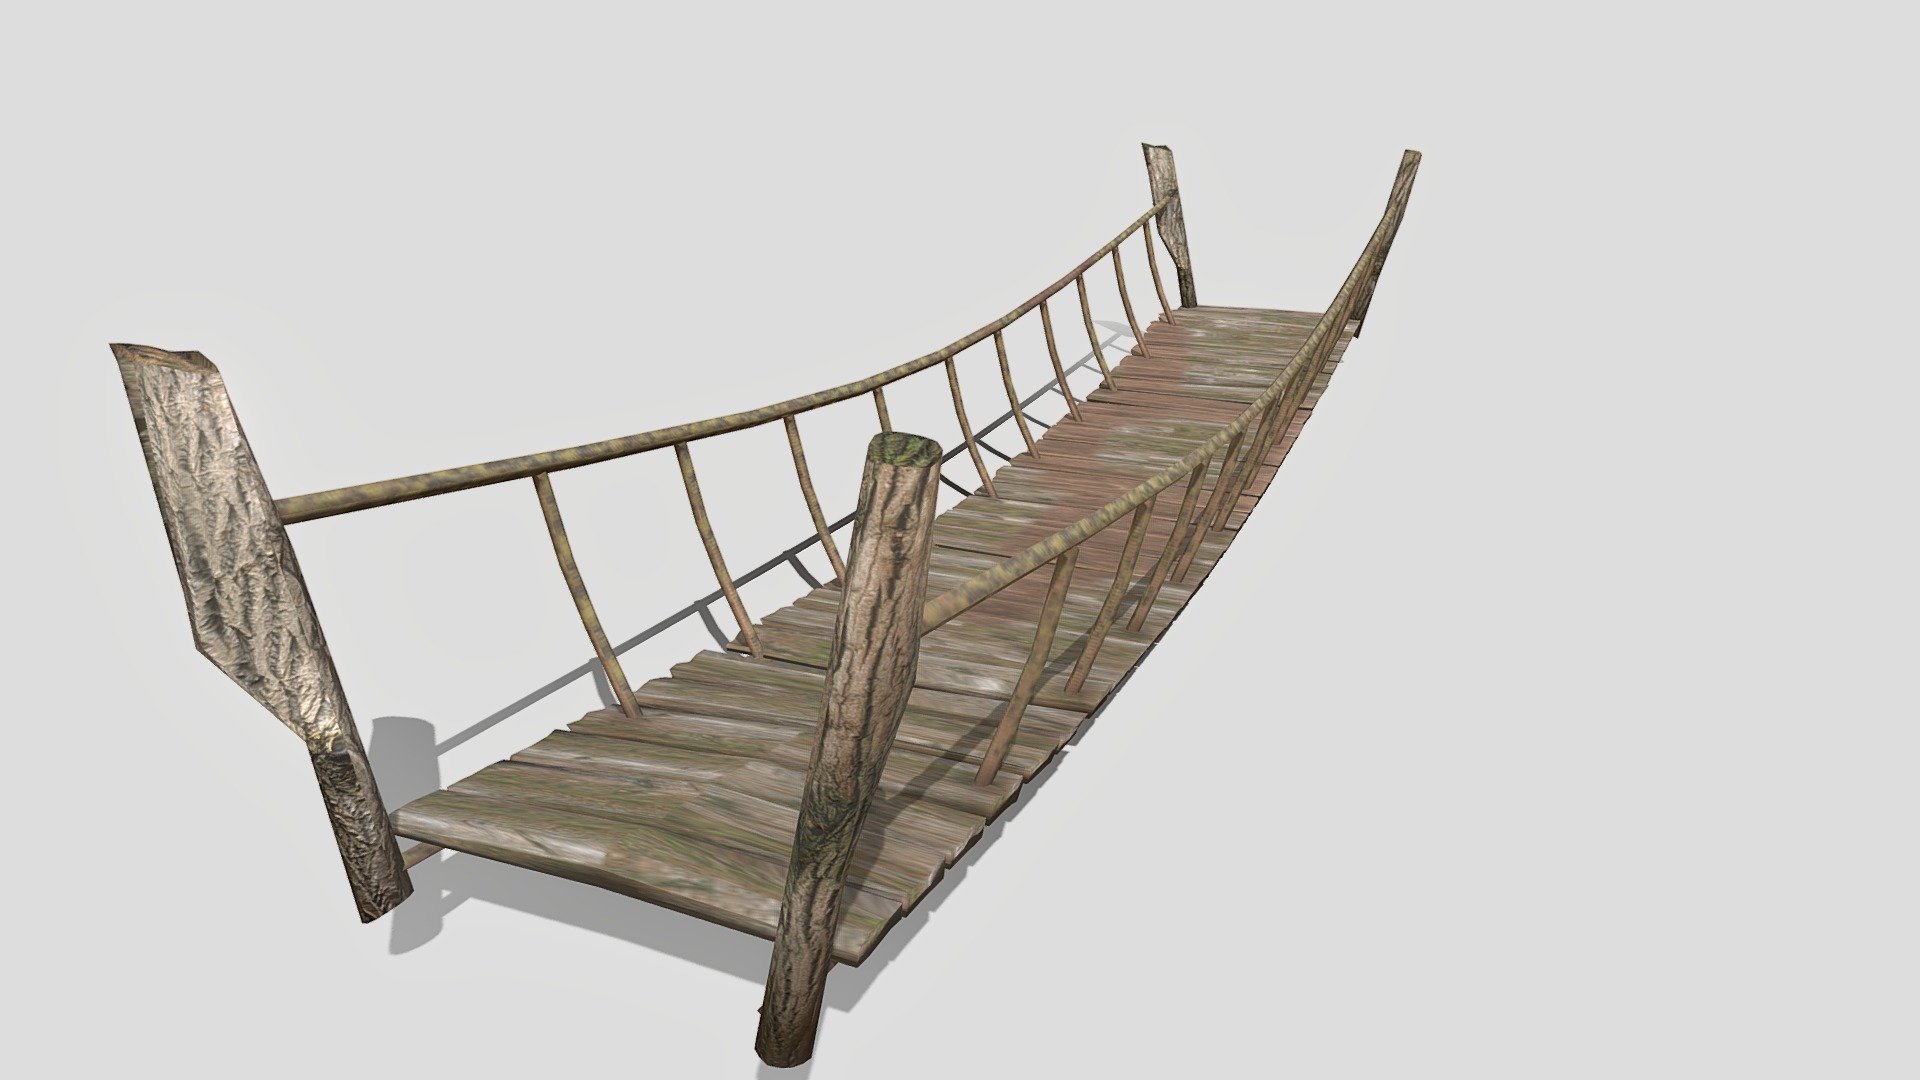 Wooden bridge, ideal model for level design in the forest.
The model is divided into three parts, each with its own material.

Optimized for games, but without LOD versions 3d model